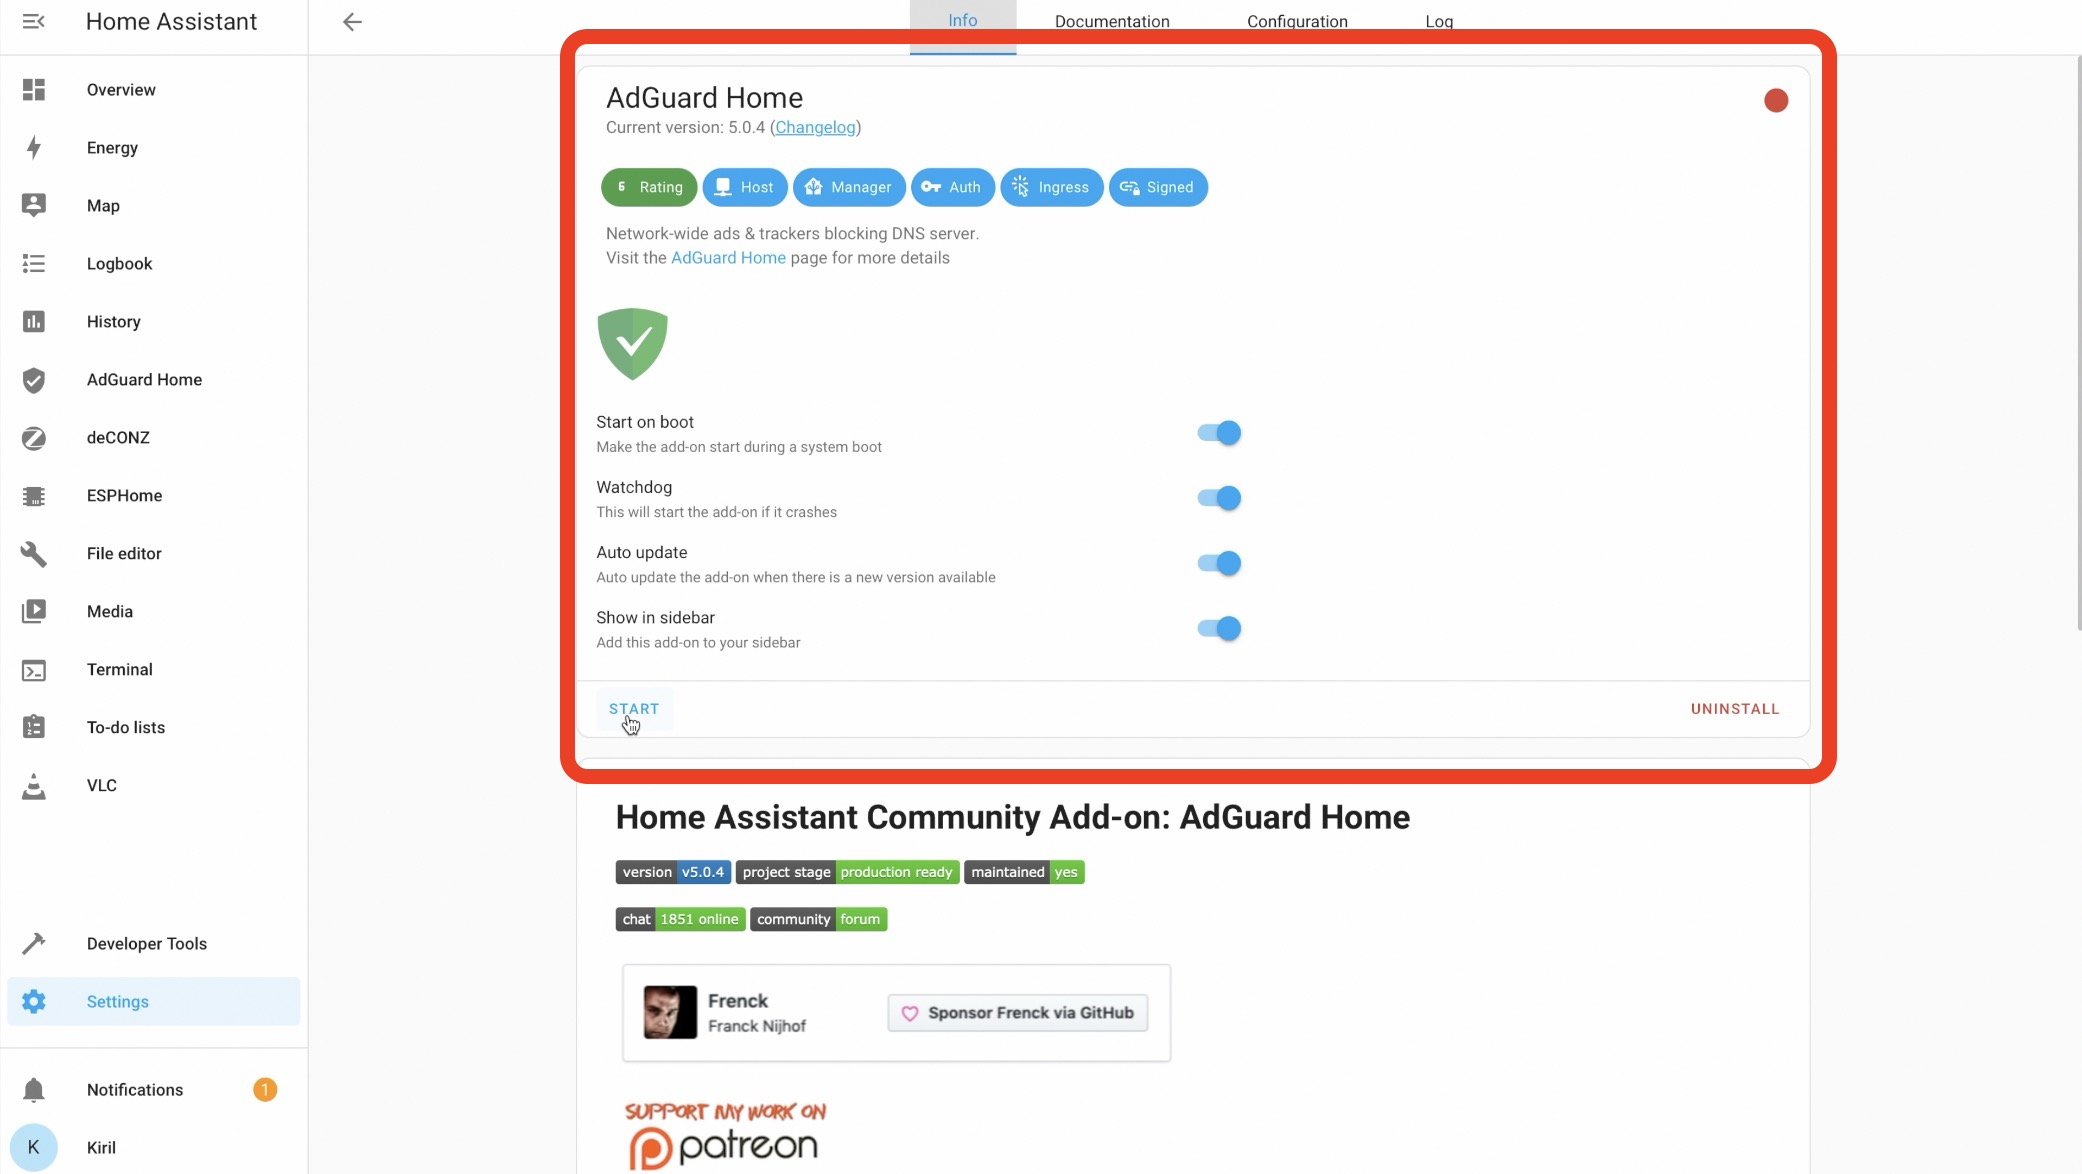 AdGuard Home is one of the Home Assistant Community Add-ons